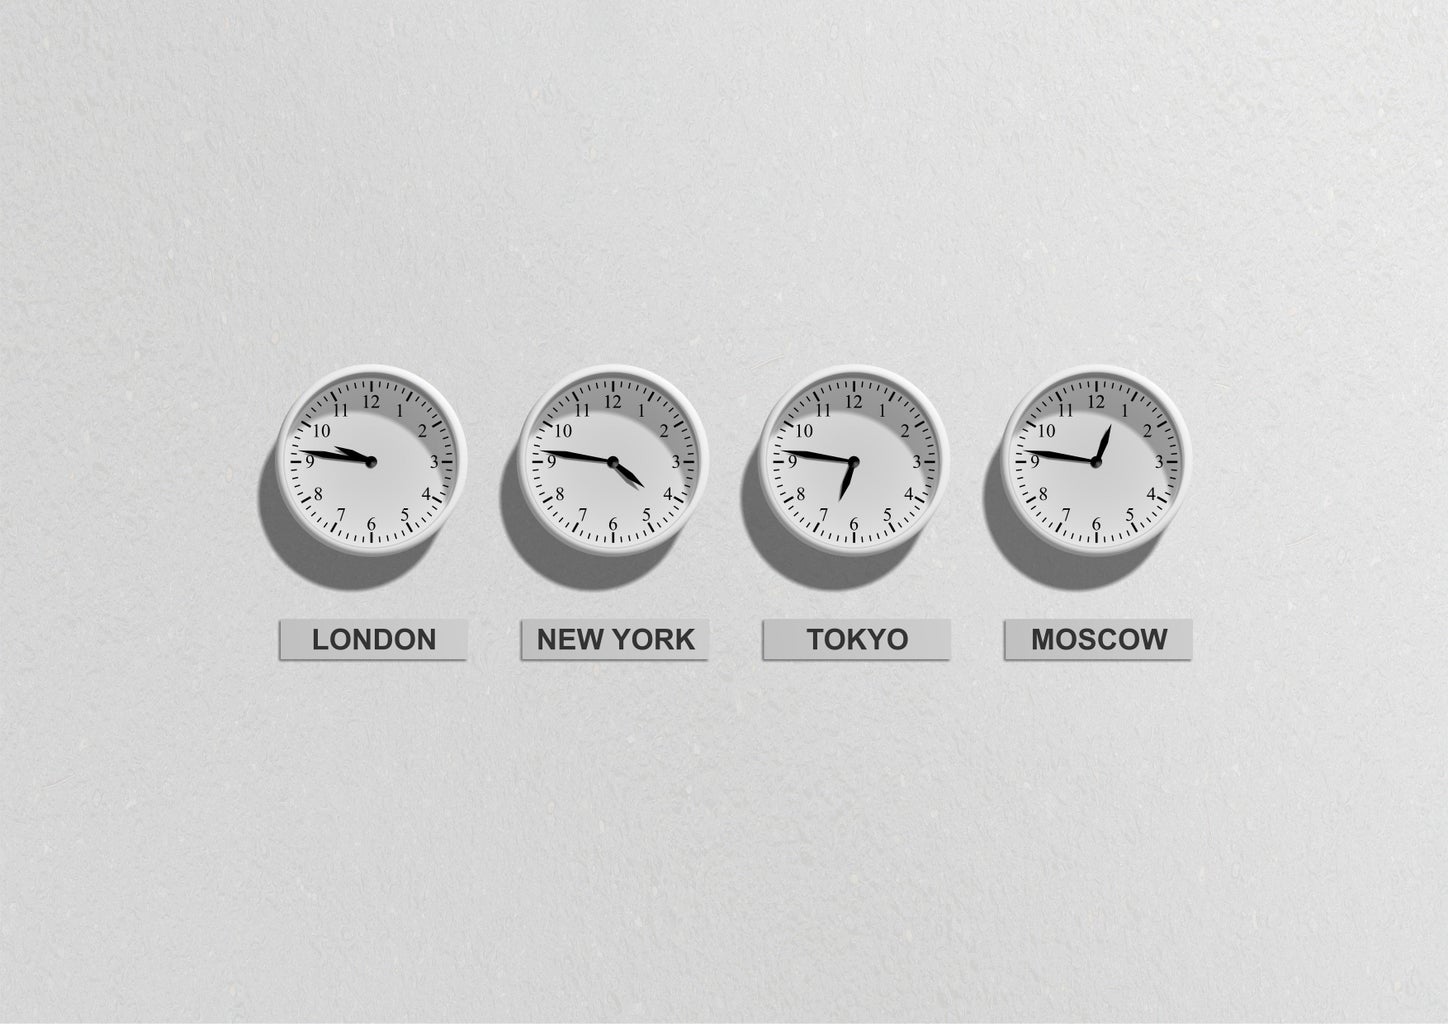 Different clocks from different time zones/cities